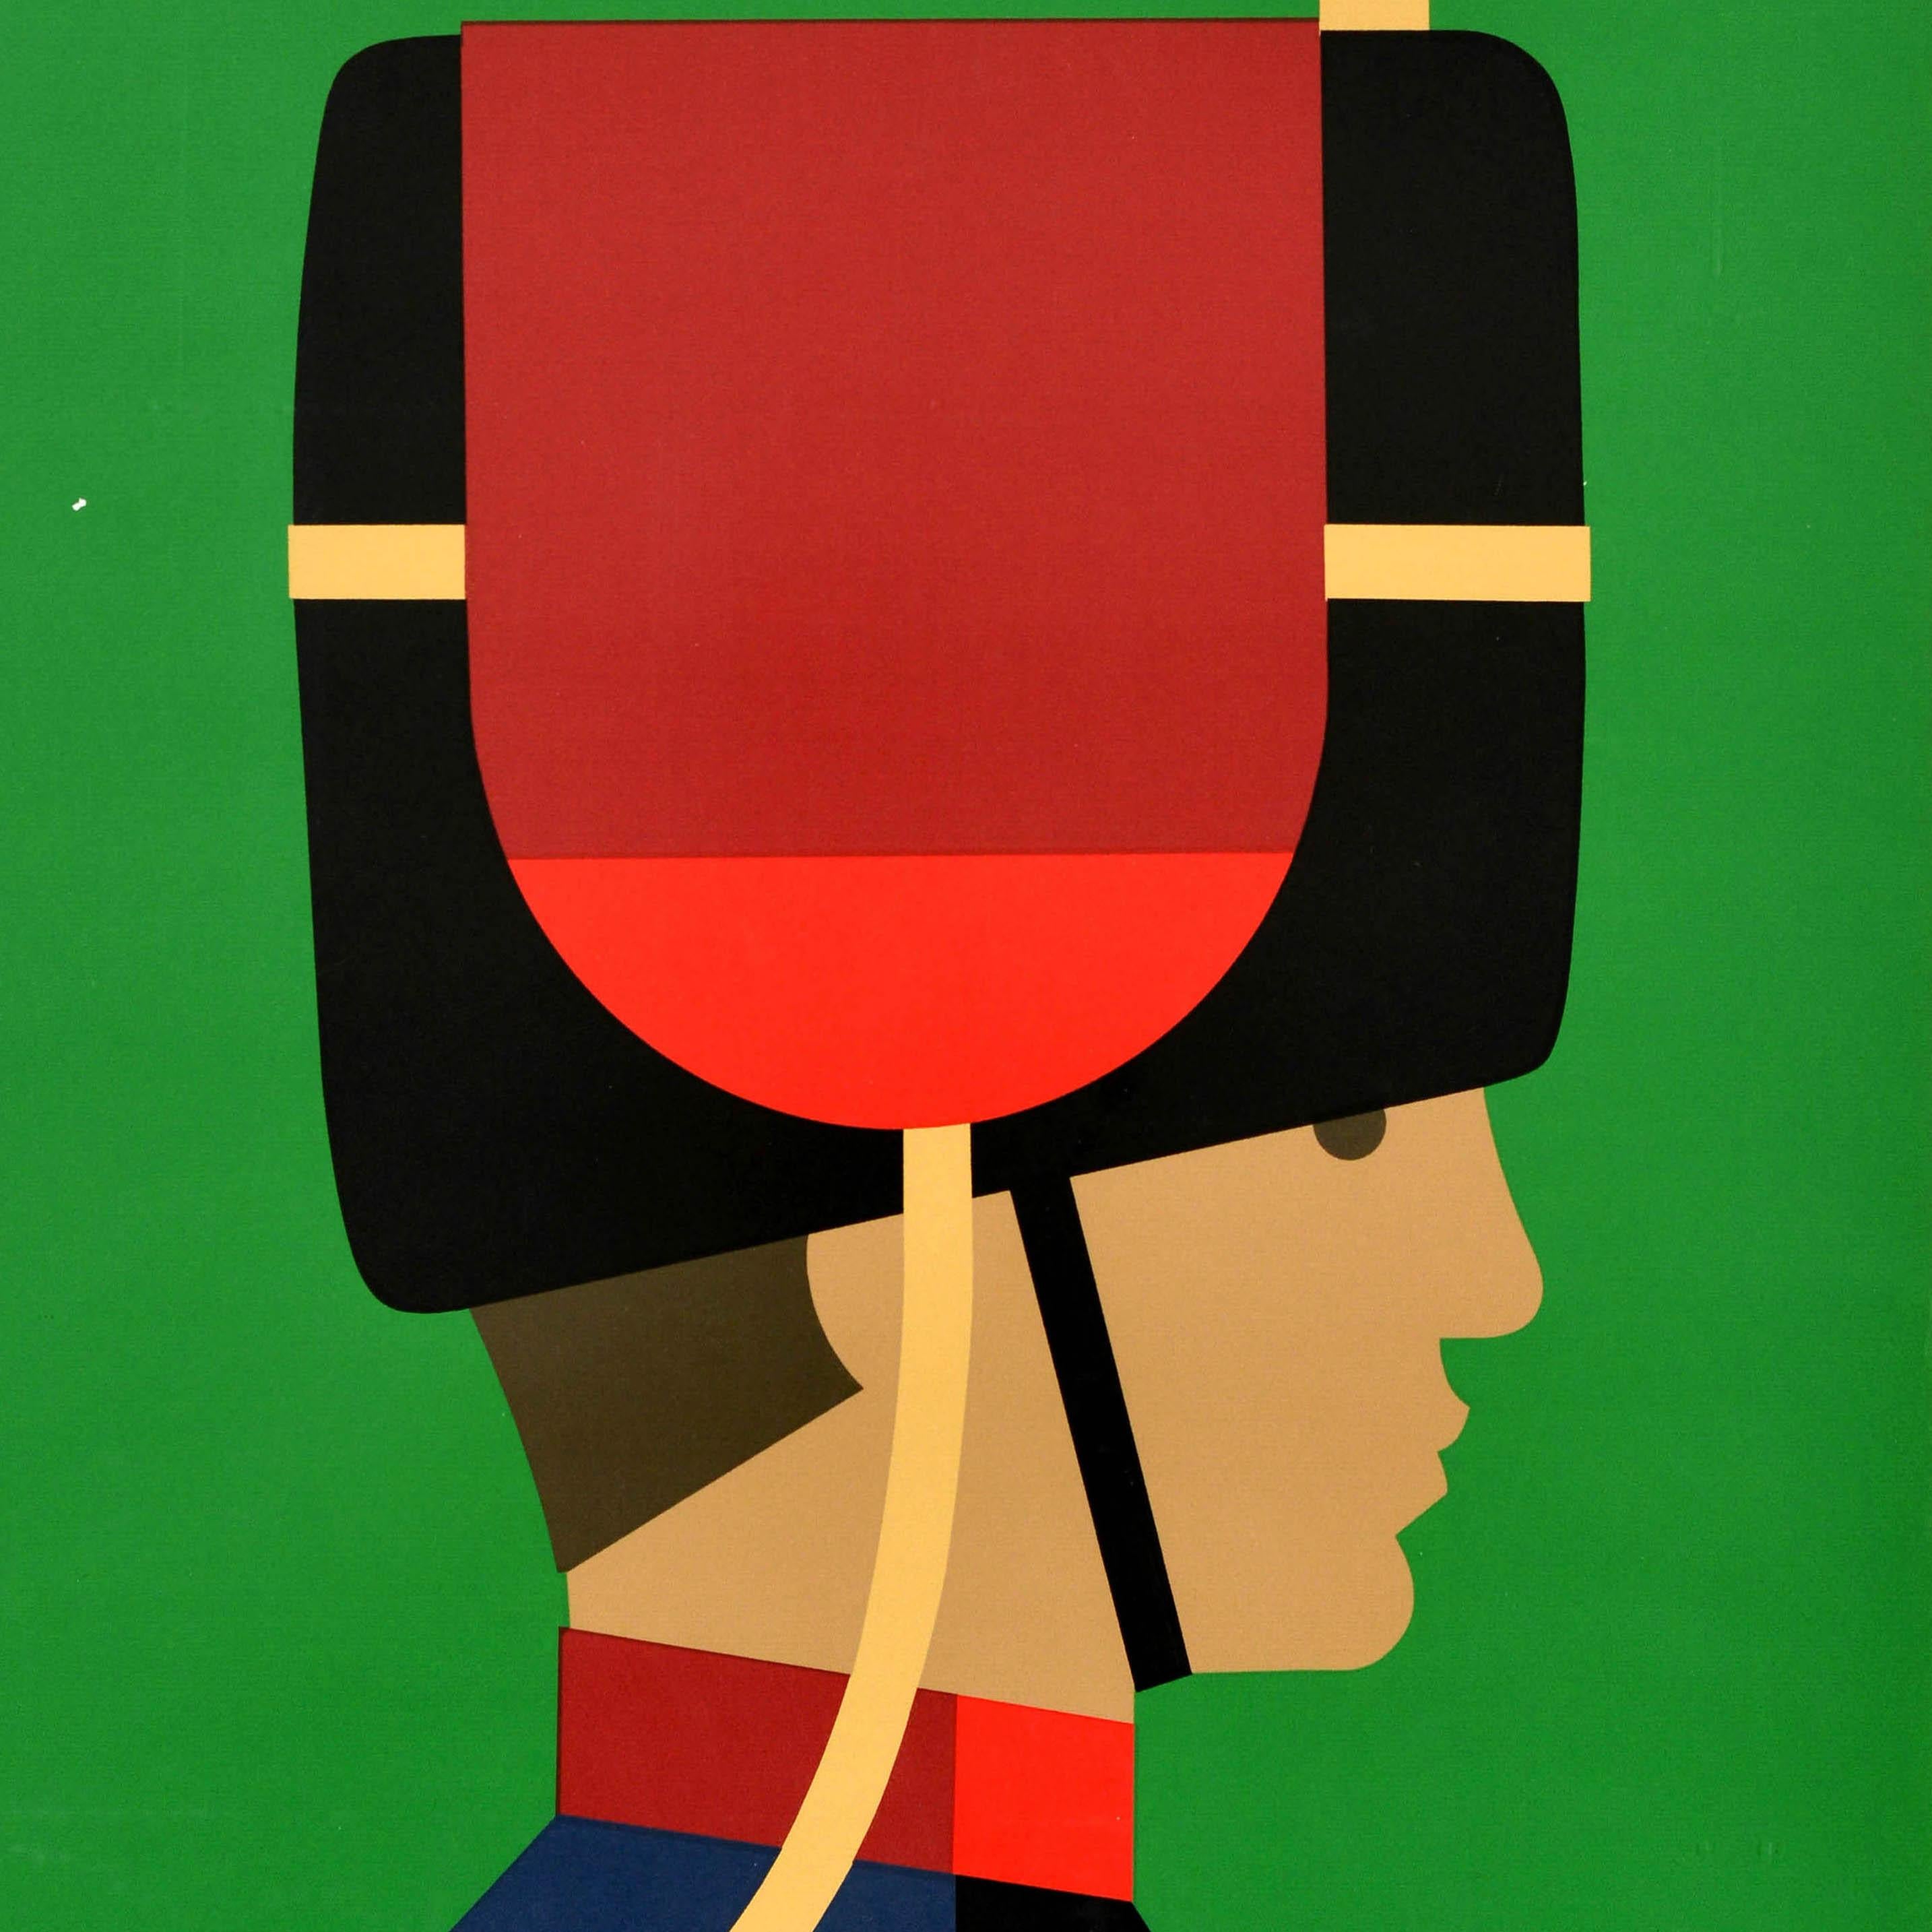 Original vintage London Transport poster featuring a great graphic design by the notable artist Tom Eckersley (1914-1997) depicting a Royal Guard in uniform on a green background, with the title in white and text in black above - Ceremonial London